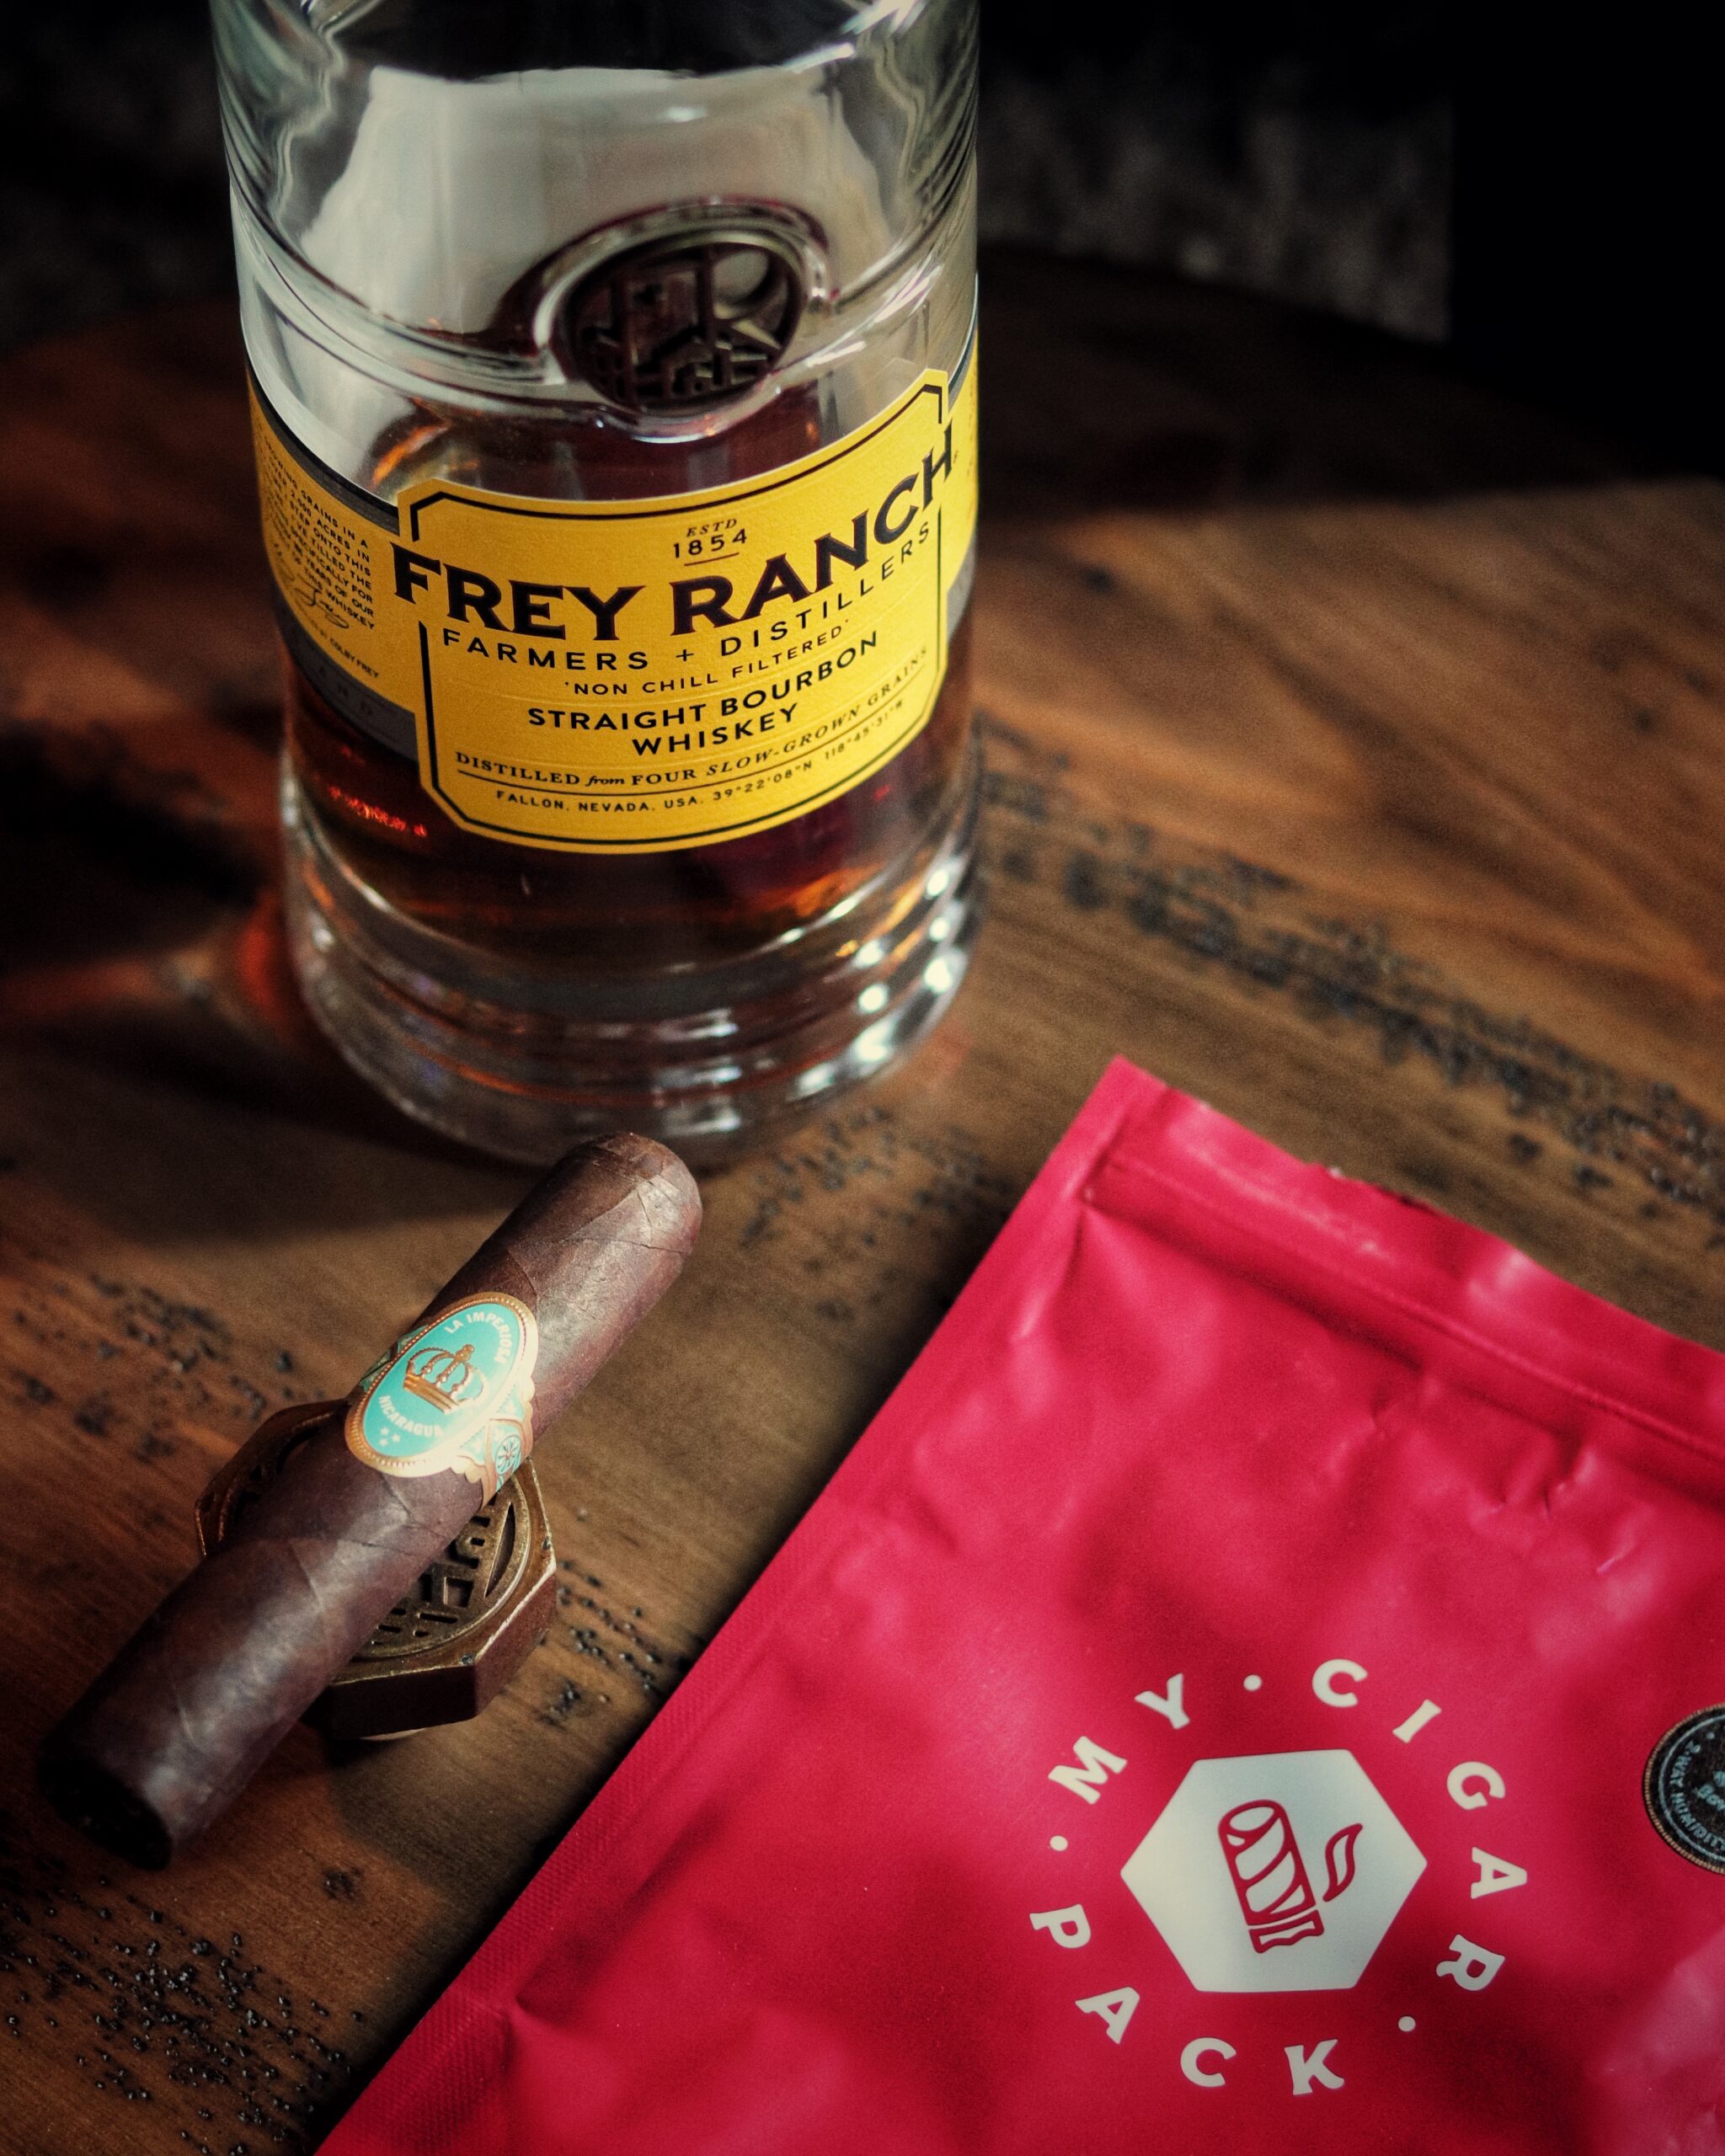 73: Pairing Whiskey with My Cigar Pack